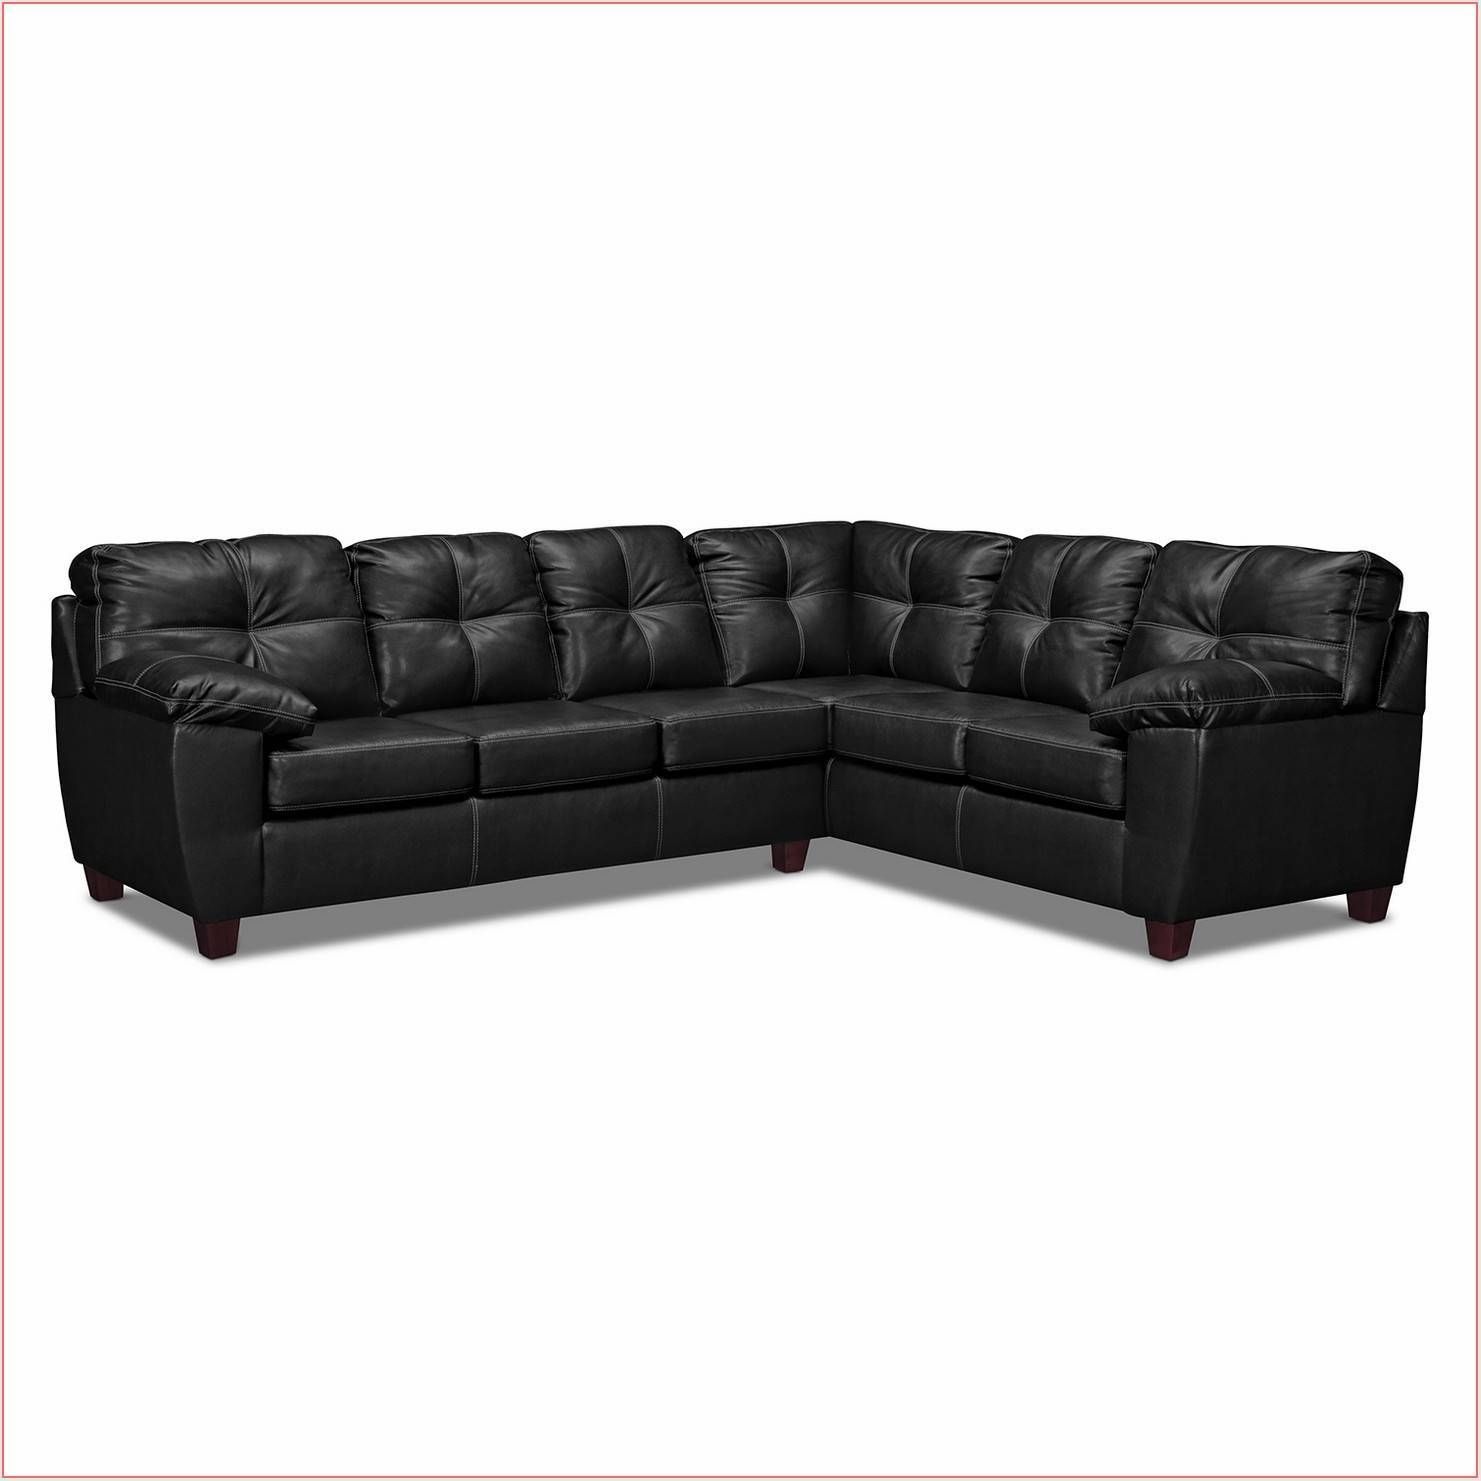 10 Piece Sectional Sofa Images – Reverse Search Intended For 10 Piece Sectional Sofa (View 9 of 30)